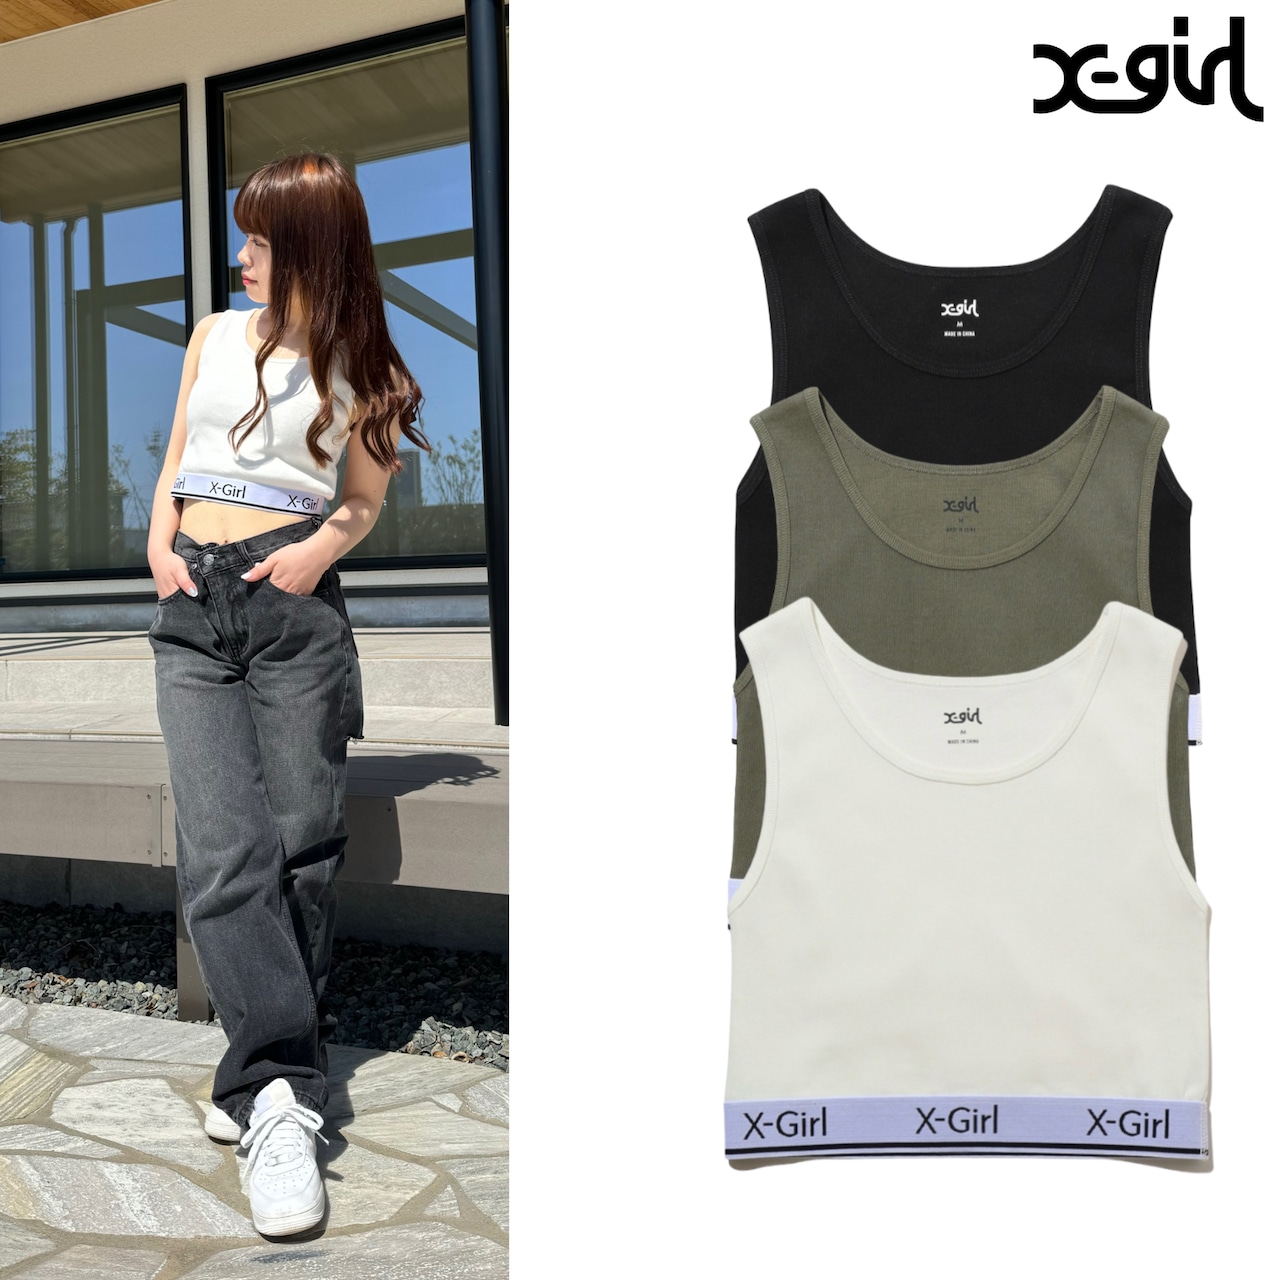 【X-girl】LOGO AND STRIPE TANK TOP 【エックスガール】